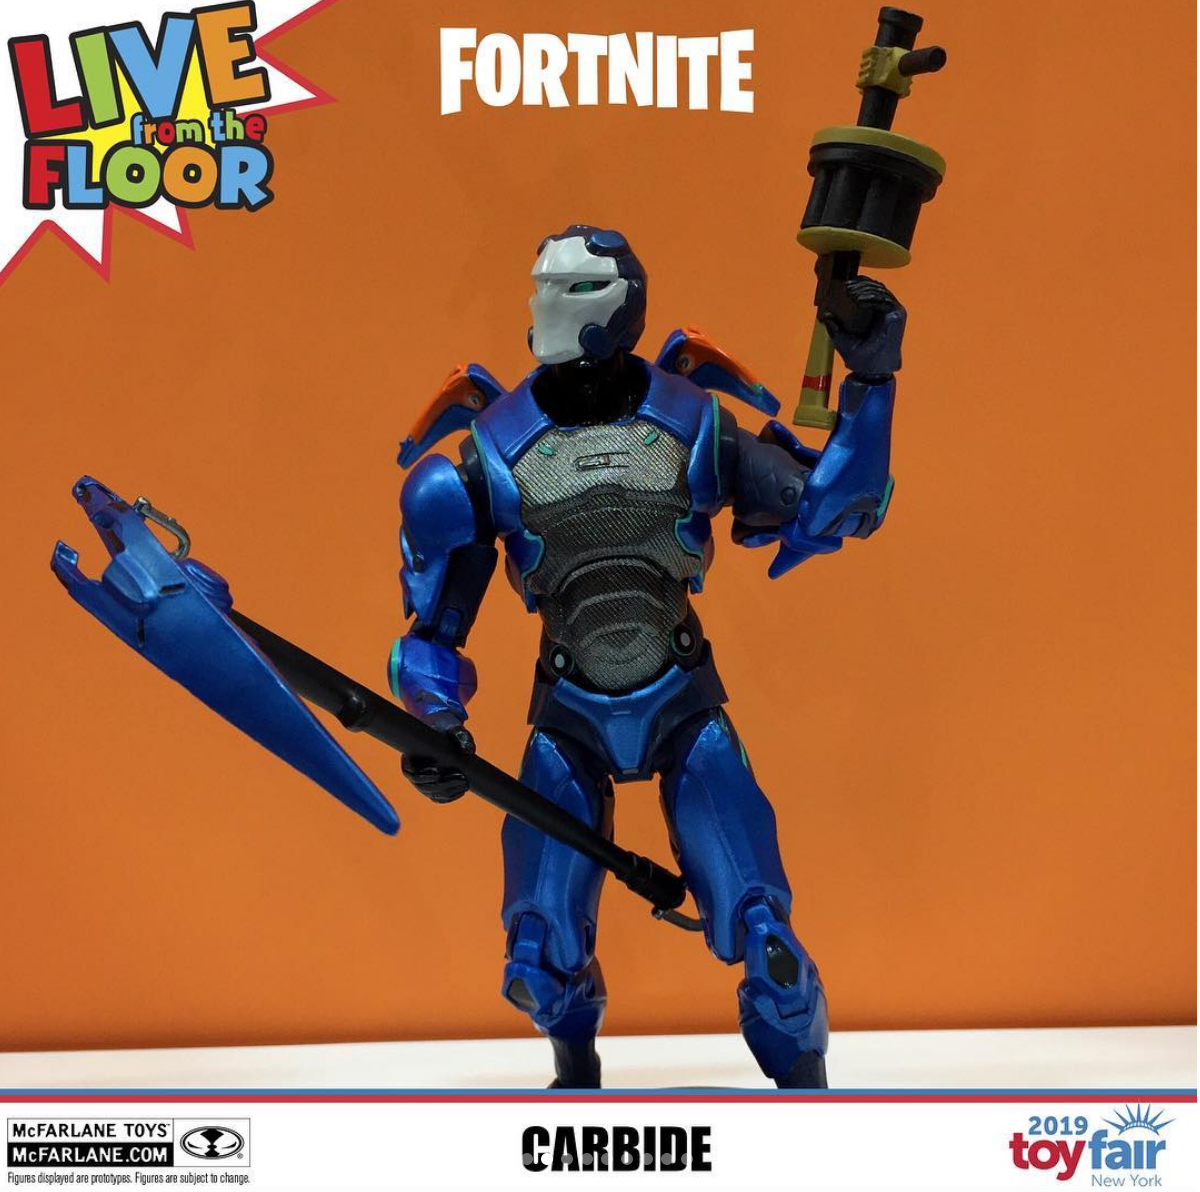 so far mcfarlane is holding the top spot for me for toy fair but it is early in the show let s see what the toy fair shows next - fortnite toy fair 2019